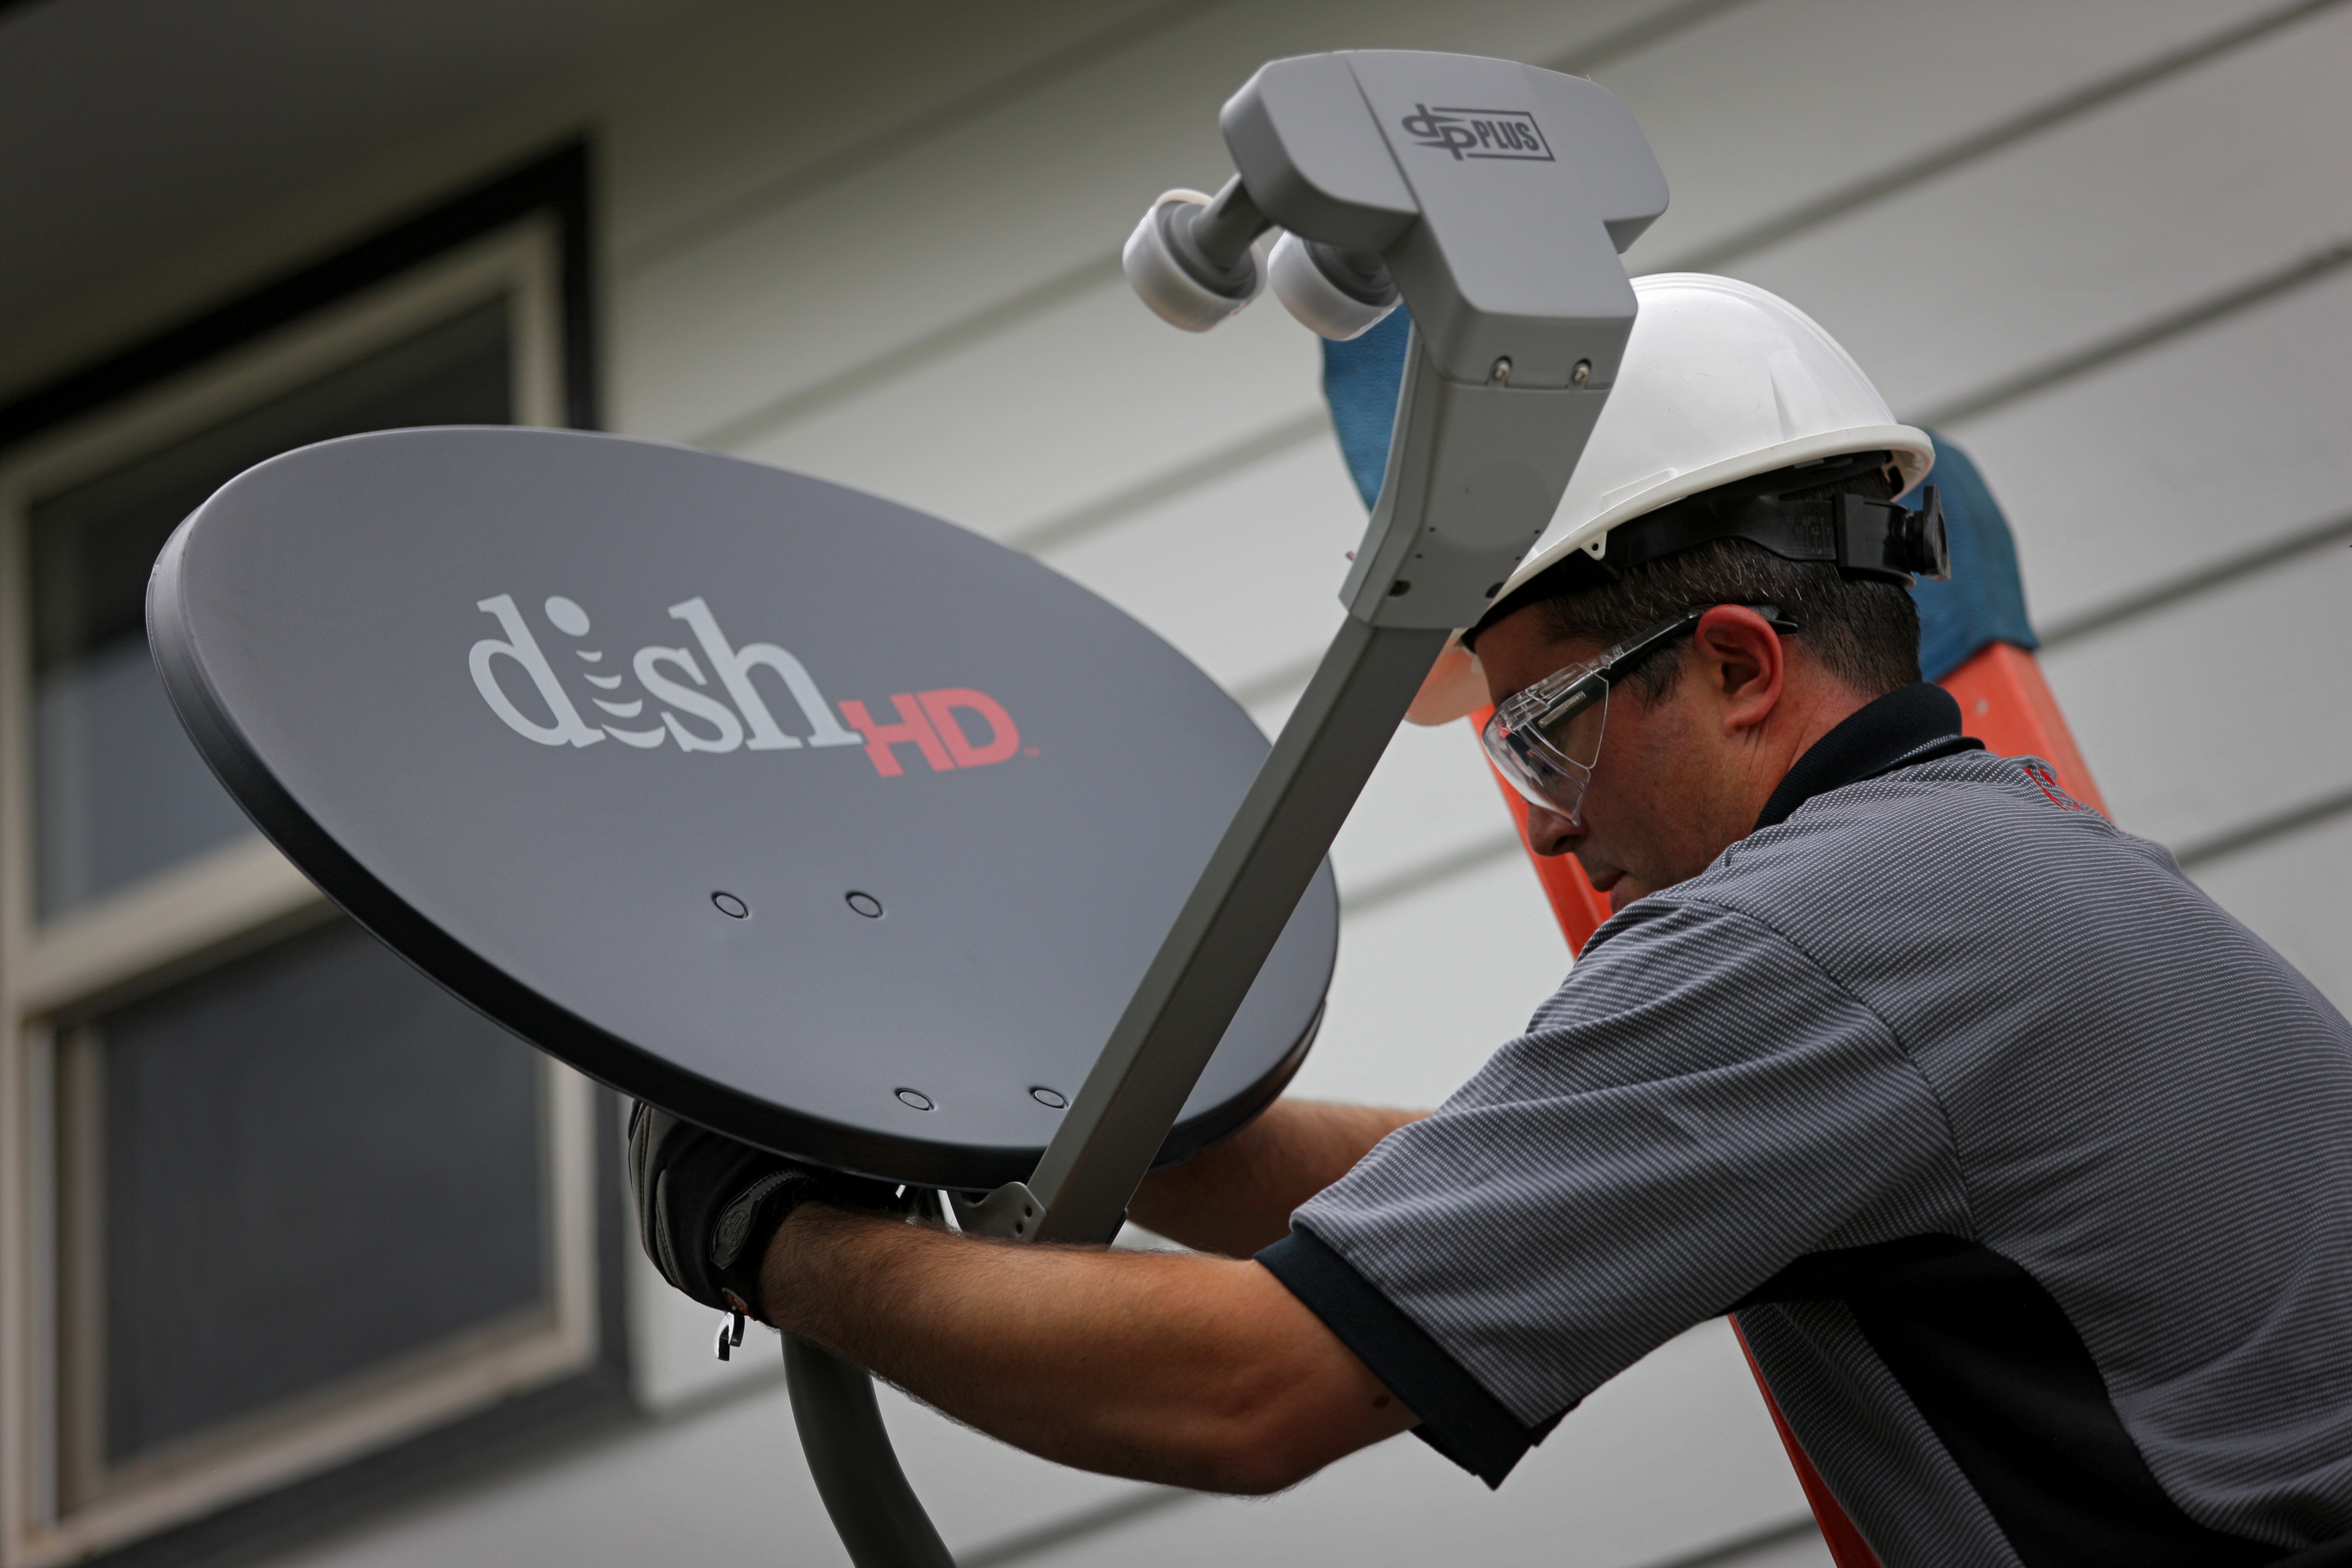 A satellite television system is installed at a residence in Denver, Colorado, on Aug. 6, 2013. (Bloomberg—Bloomberg via Getty Images)